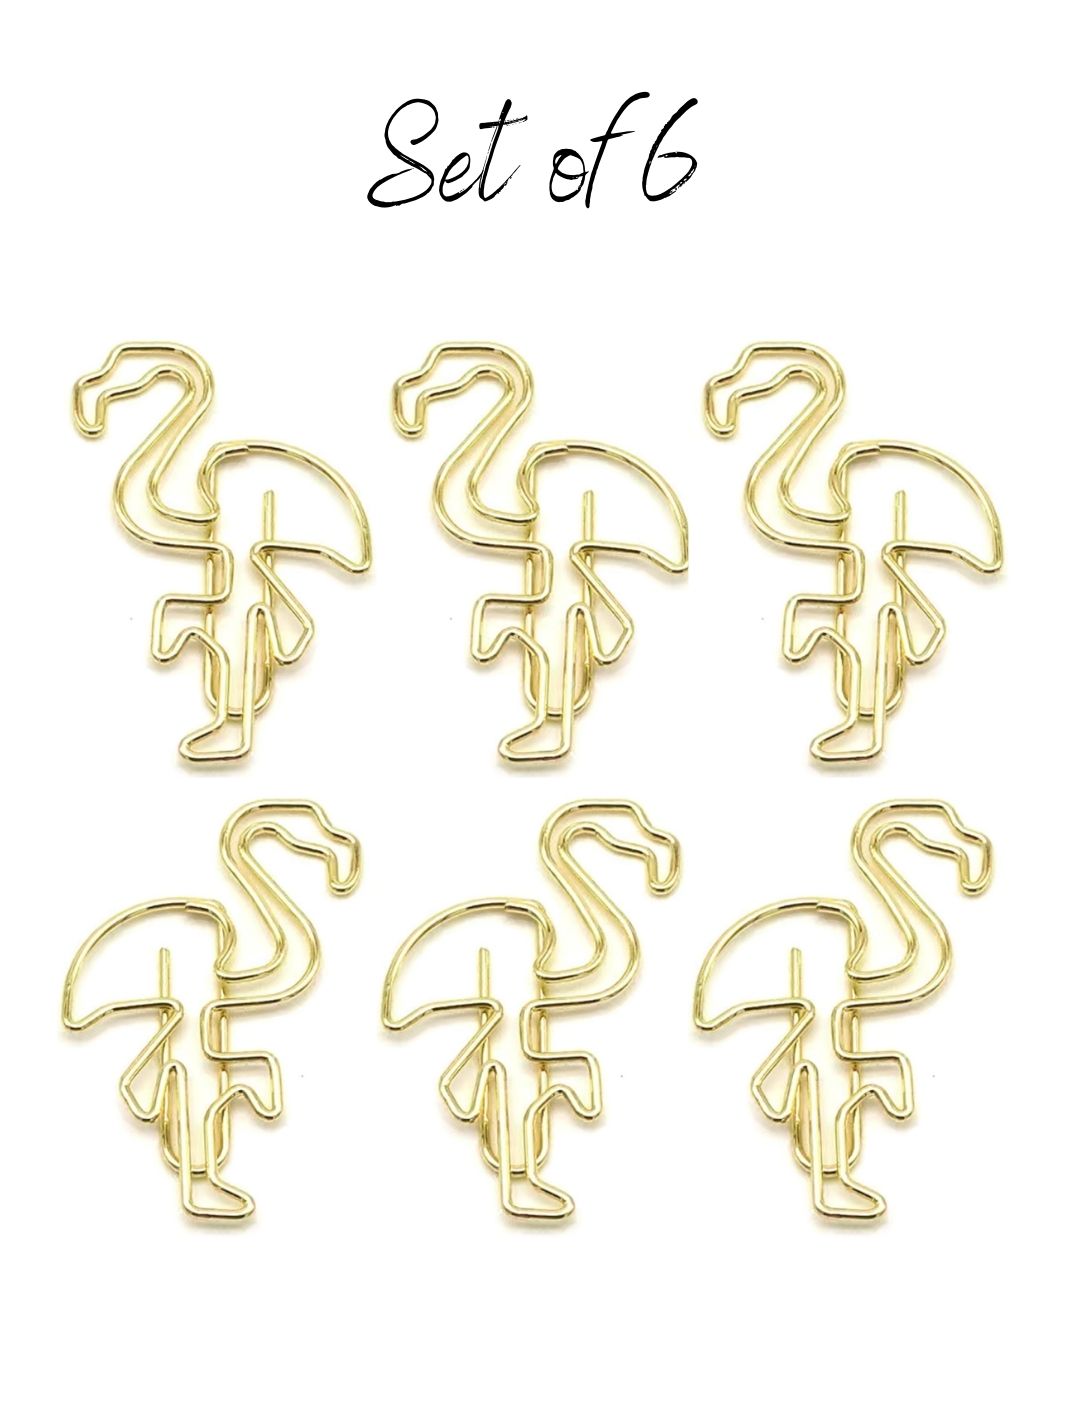 Flamingo Paperclips for Bird and Animal Lovers - Gold